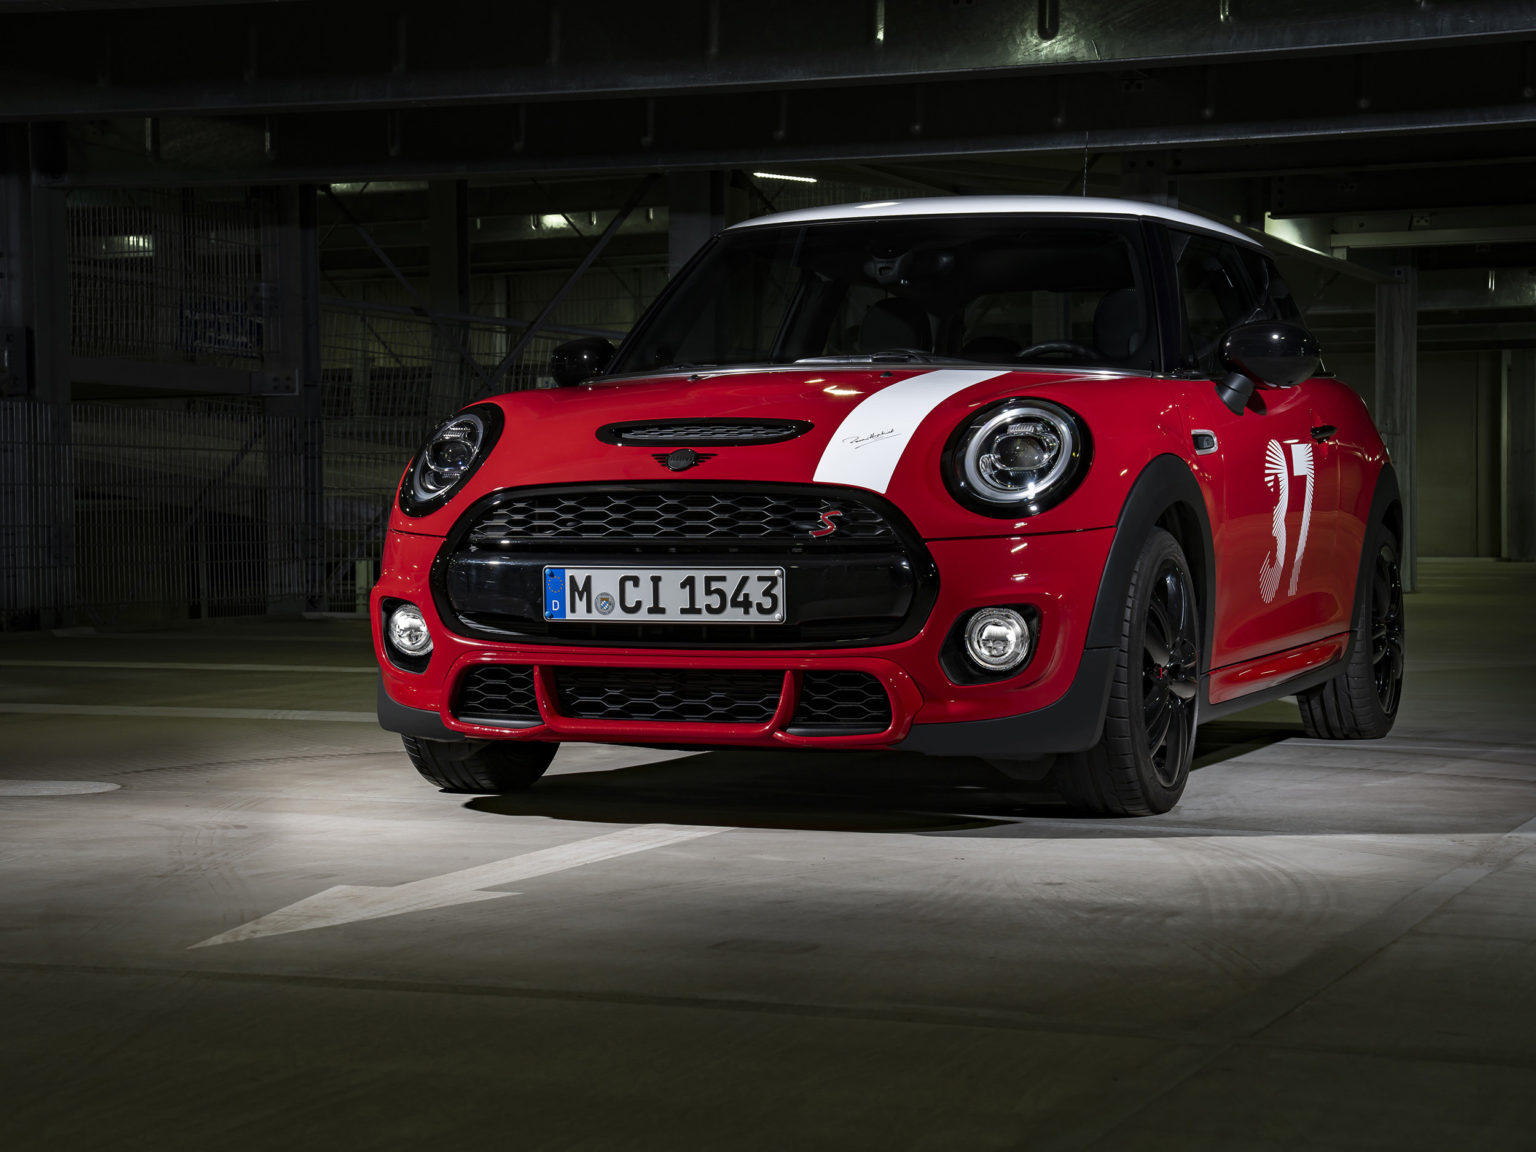 The new MINI Paddy Hopkirk Edition is named after a famed Irish rally driver.